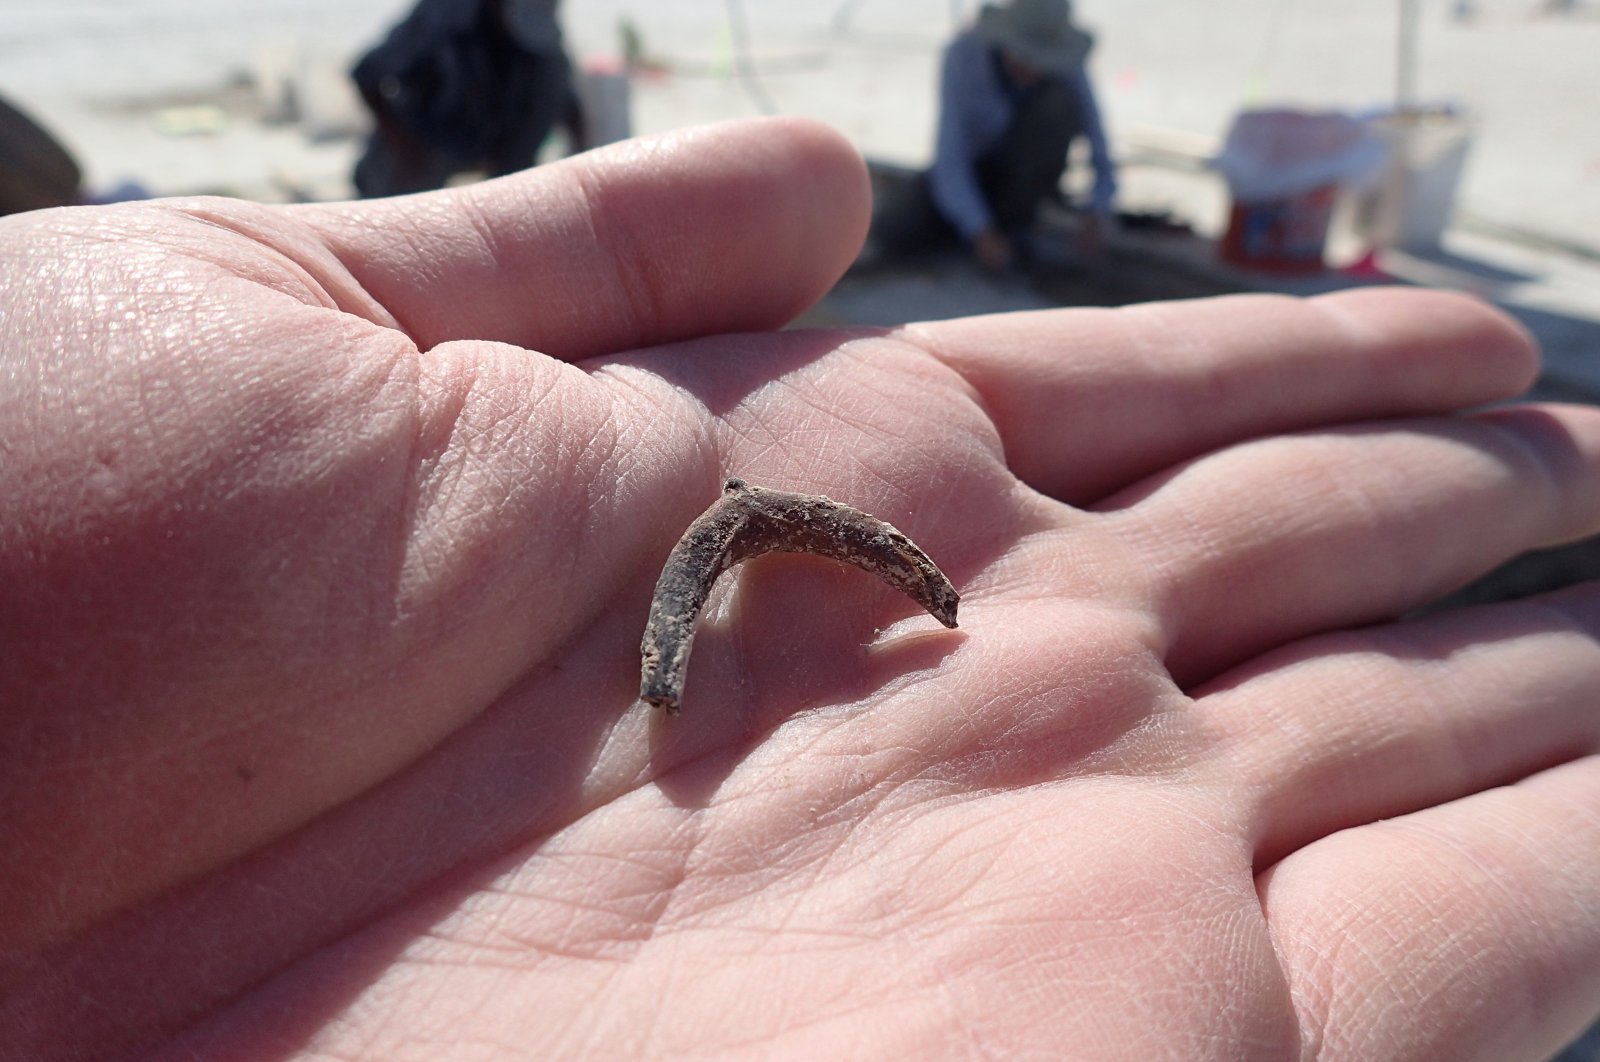 A duck wishbone is seen in this undated photo in the palm of archaeologist Daron Duke's hand at the location of an ancient 12,300-year-old hearth at the Wishbone site in the Great Salt Lake Desert in northern Utah, U.S. (Reuters Photo)